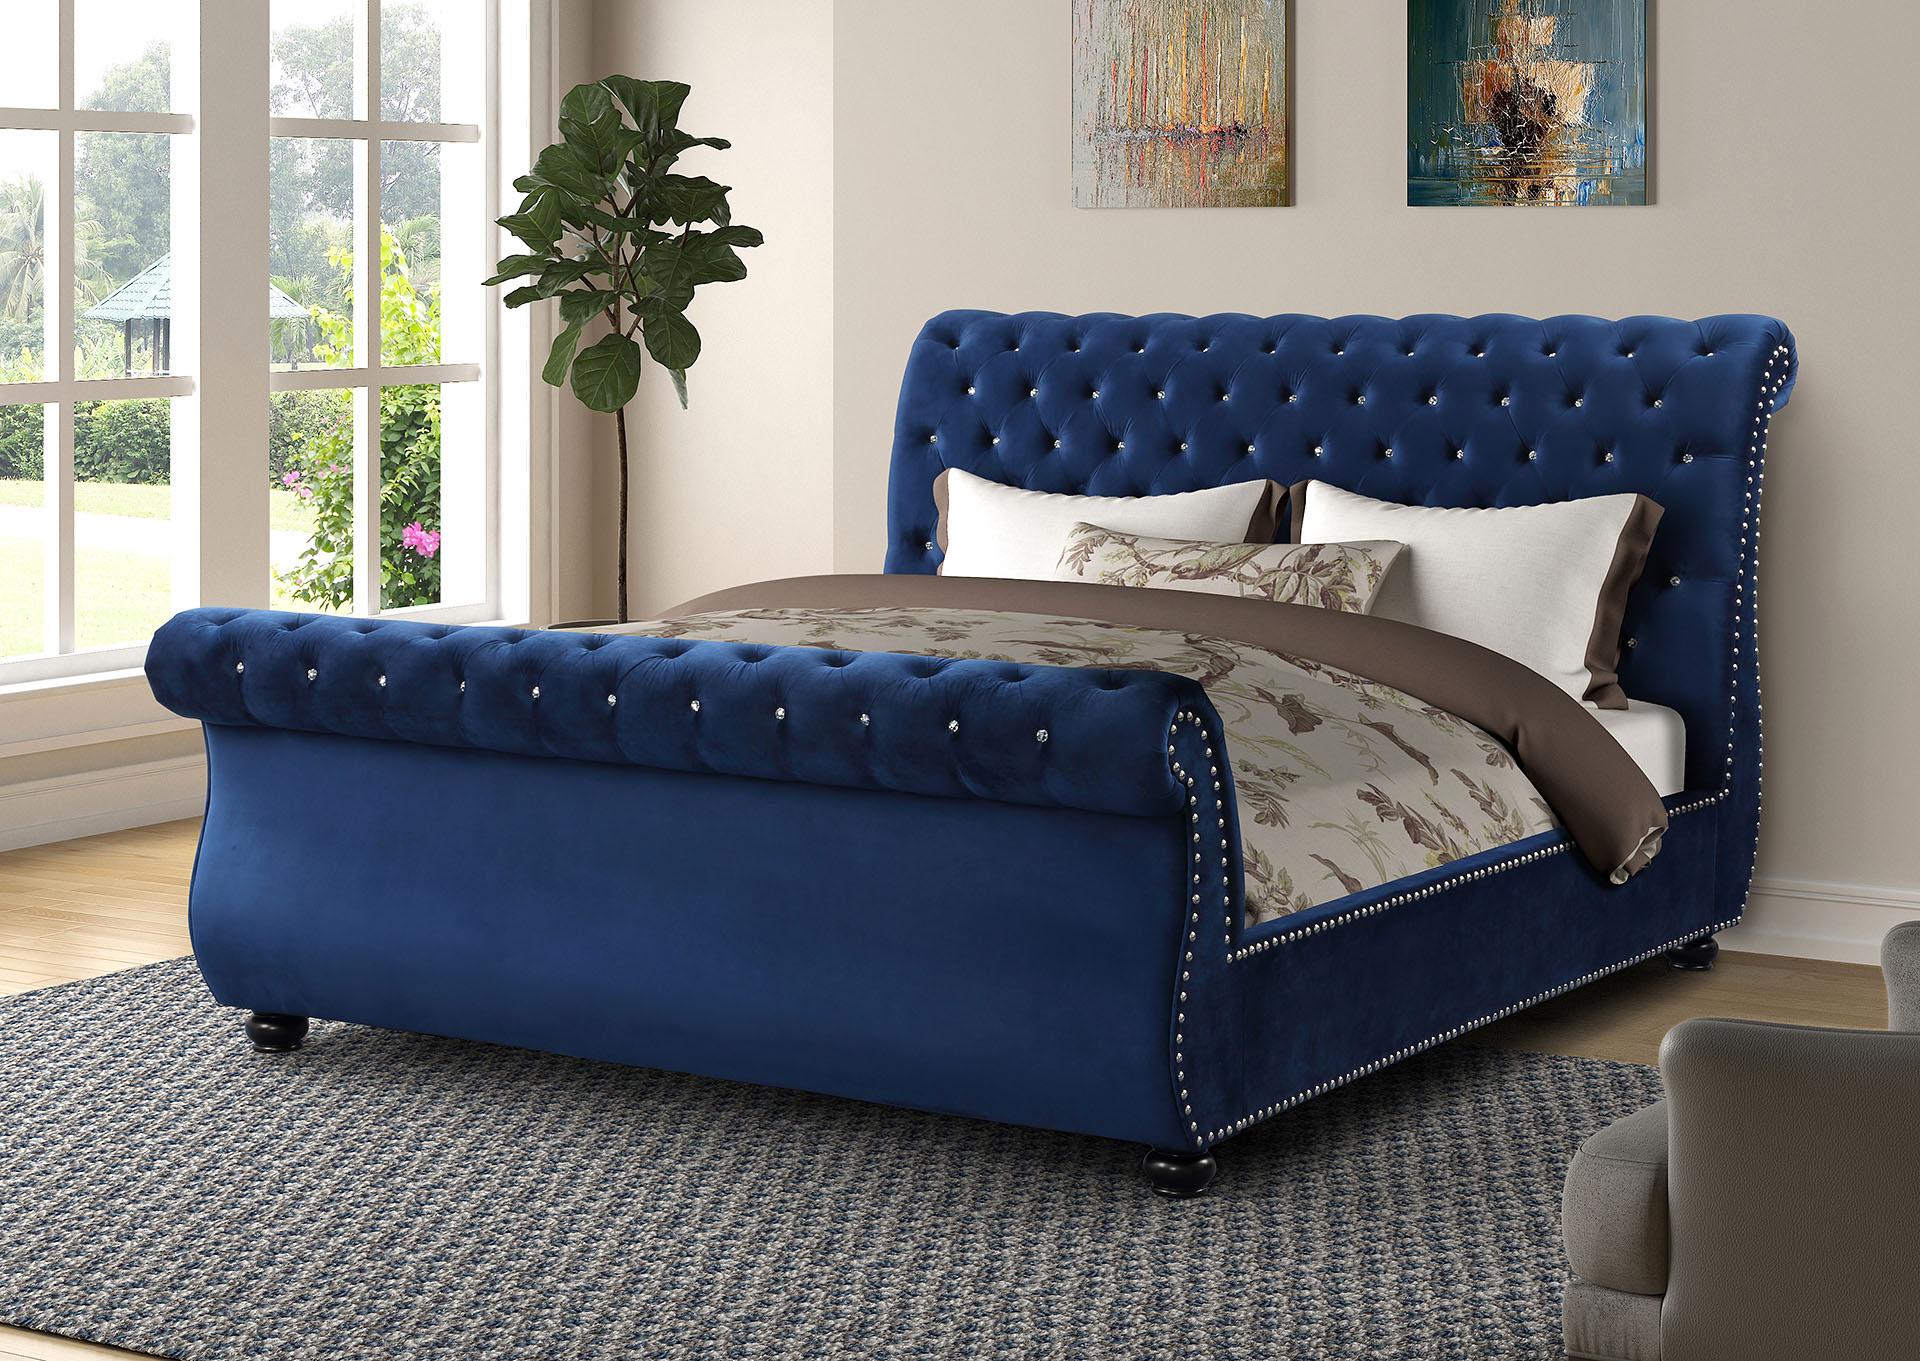 Contemporary, Modern Sleigh Bed KENDALL GHF-808857957696 in Navy 